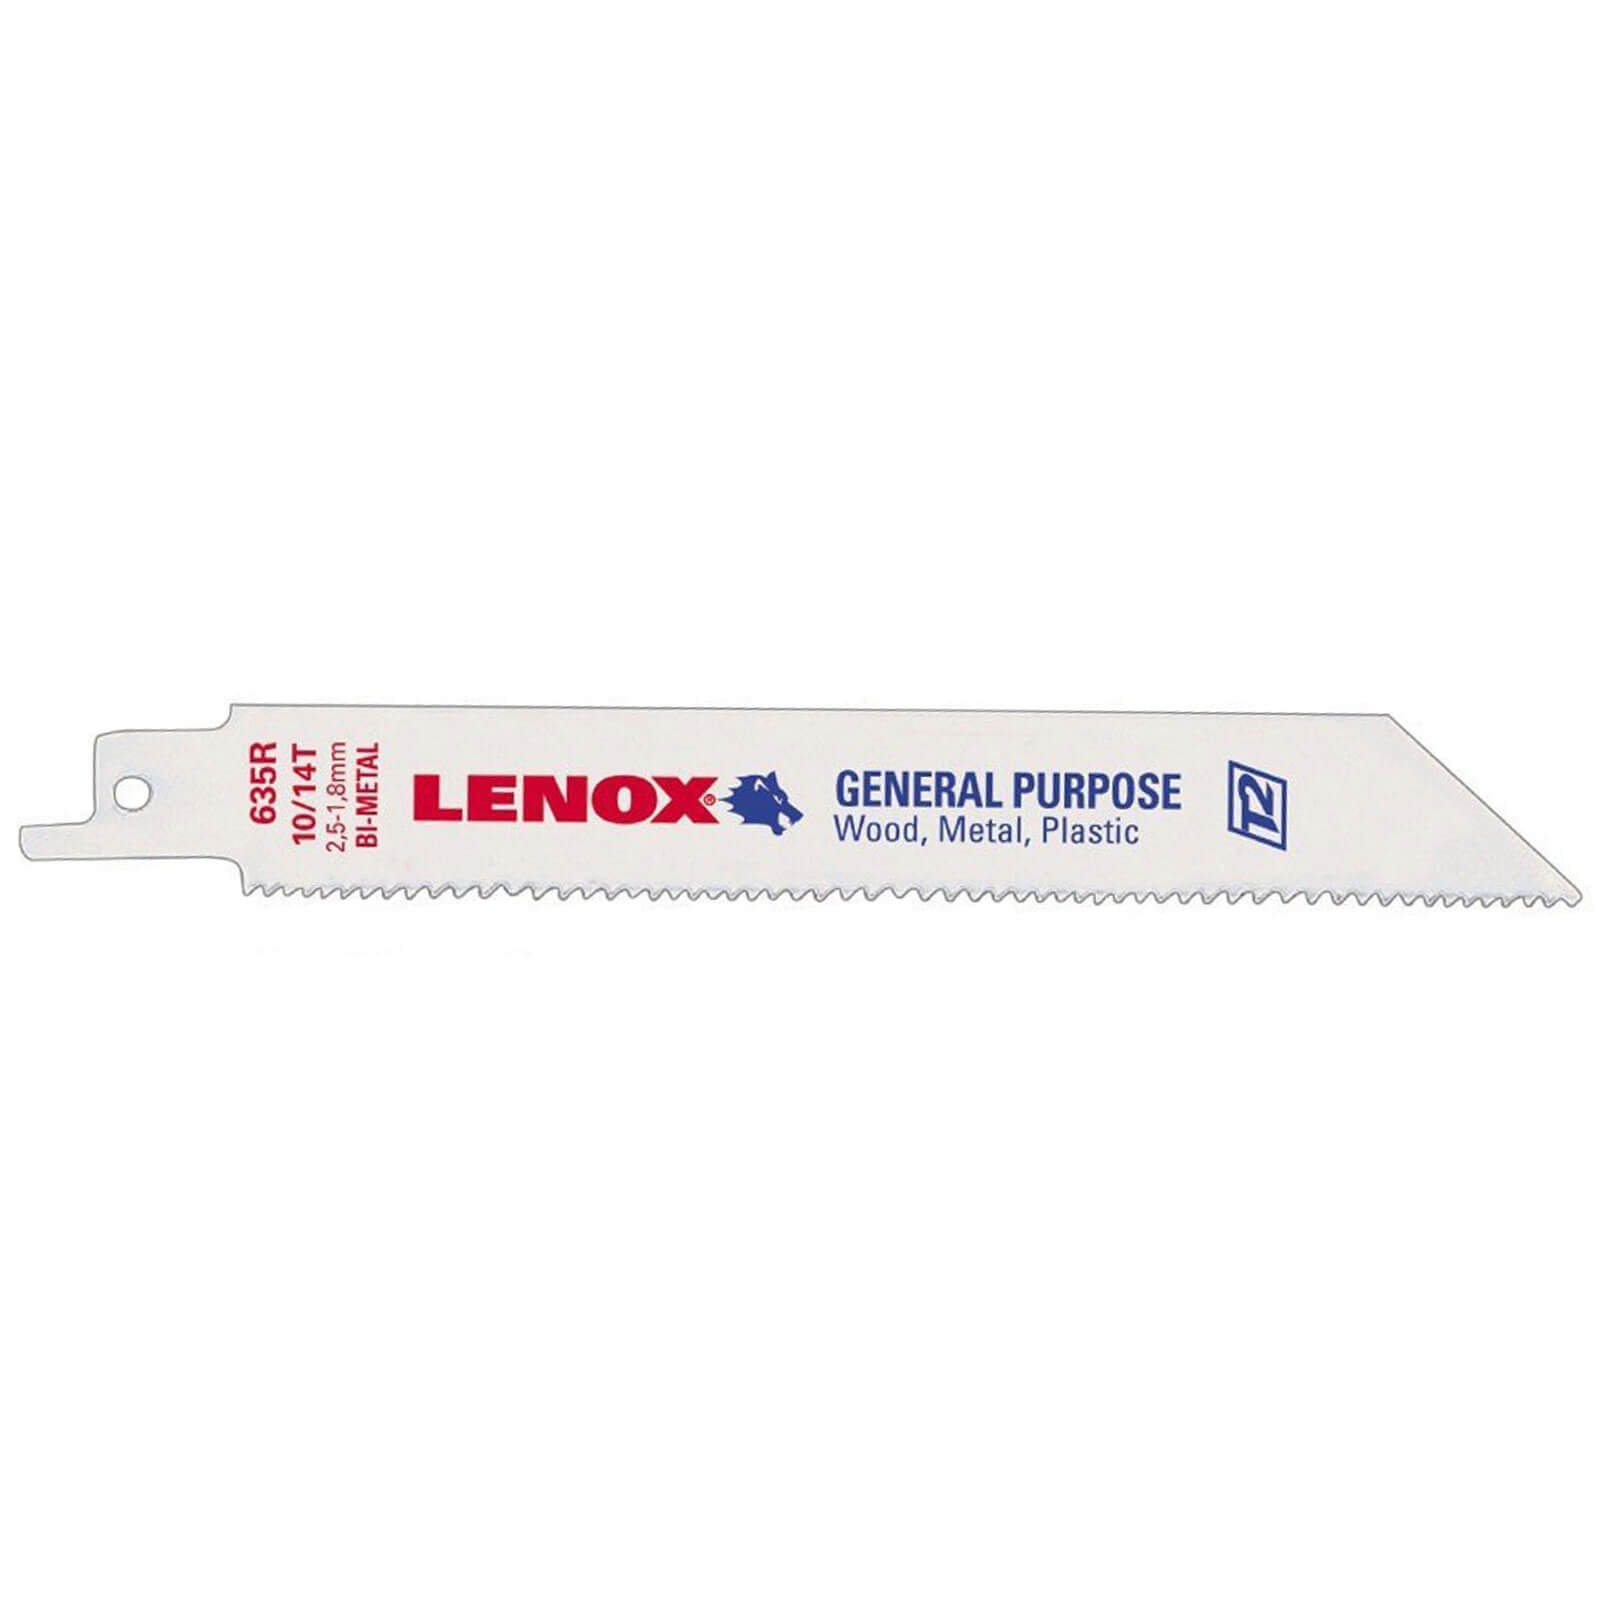 Image of Lenox Multi Material Reciprocating Sabre Saw Blades 152mm Pack of 5